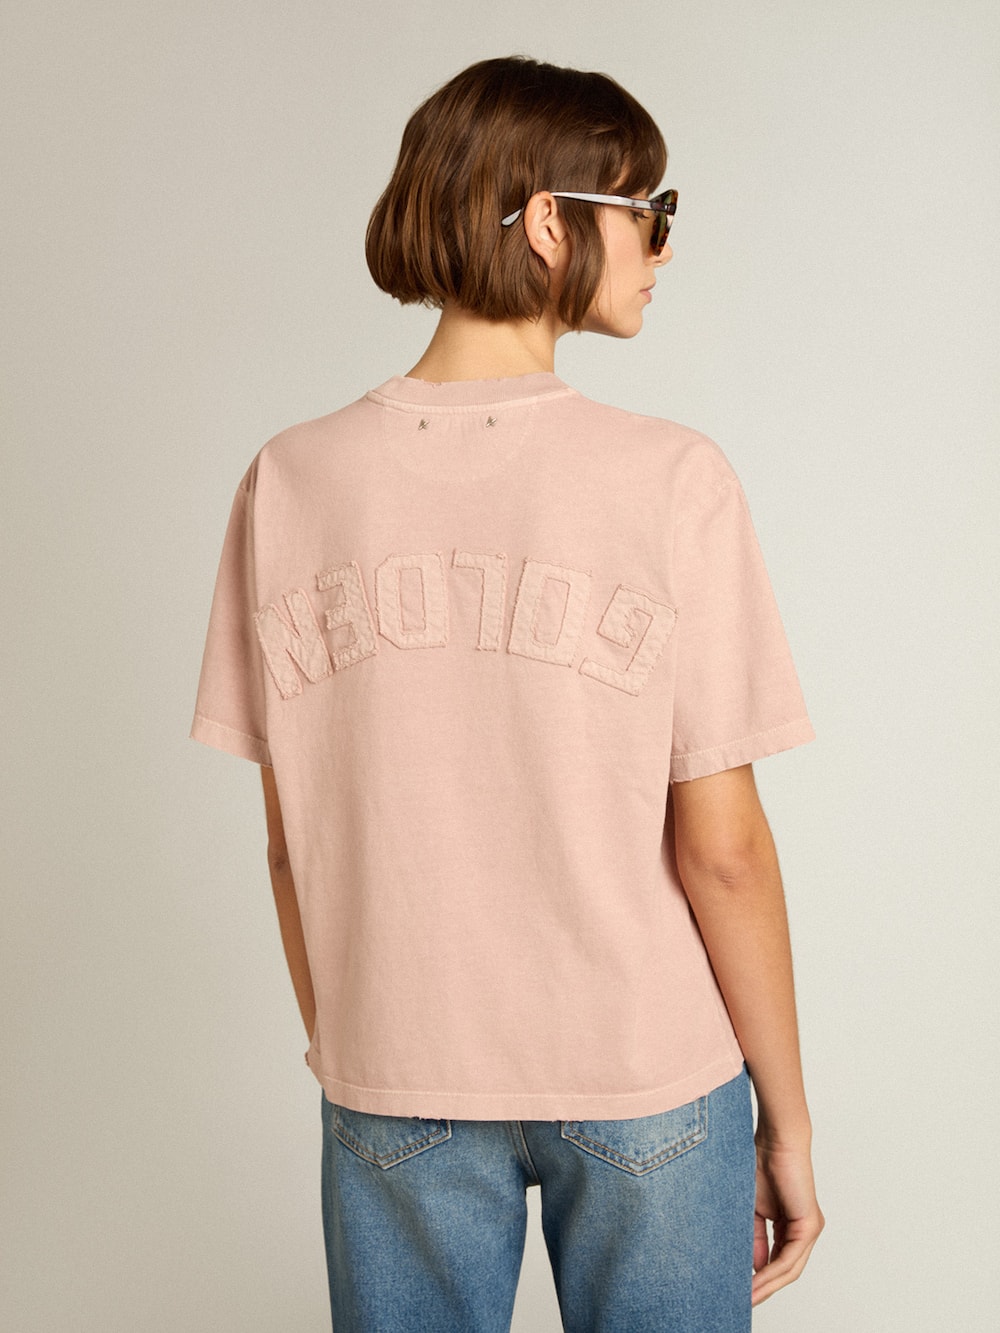 Golden Goose - Powder-pink T-shirt with reverse logo on the back - Boxy fit in 